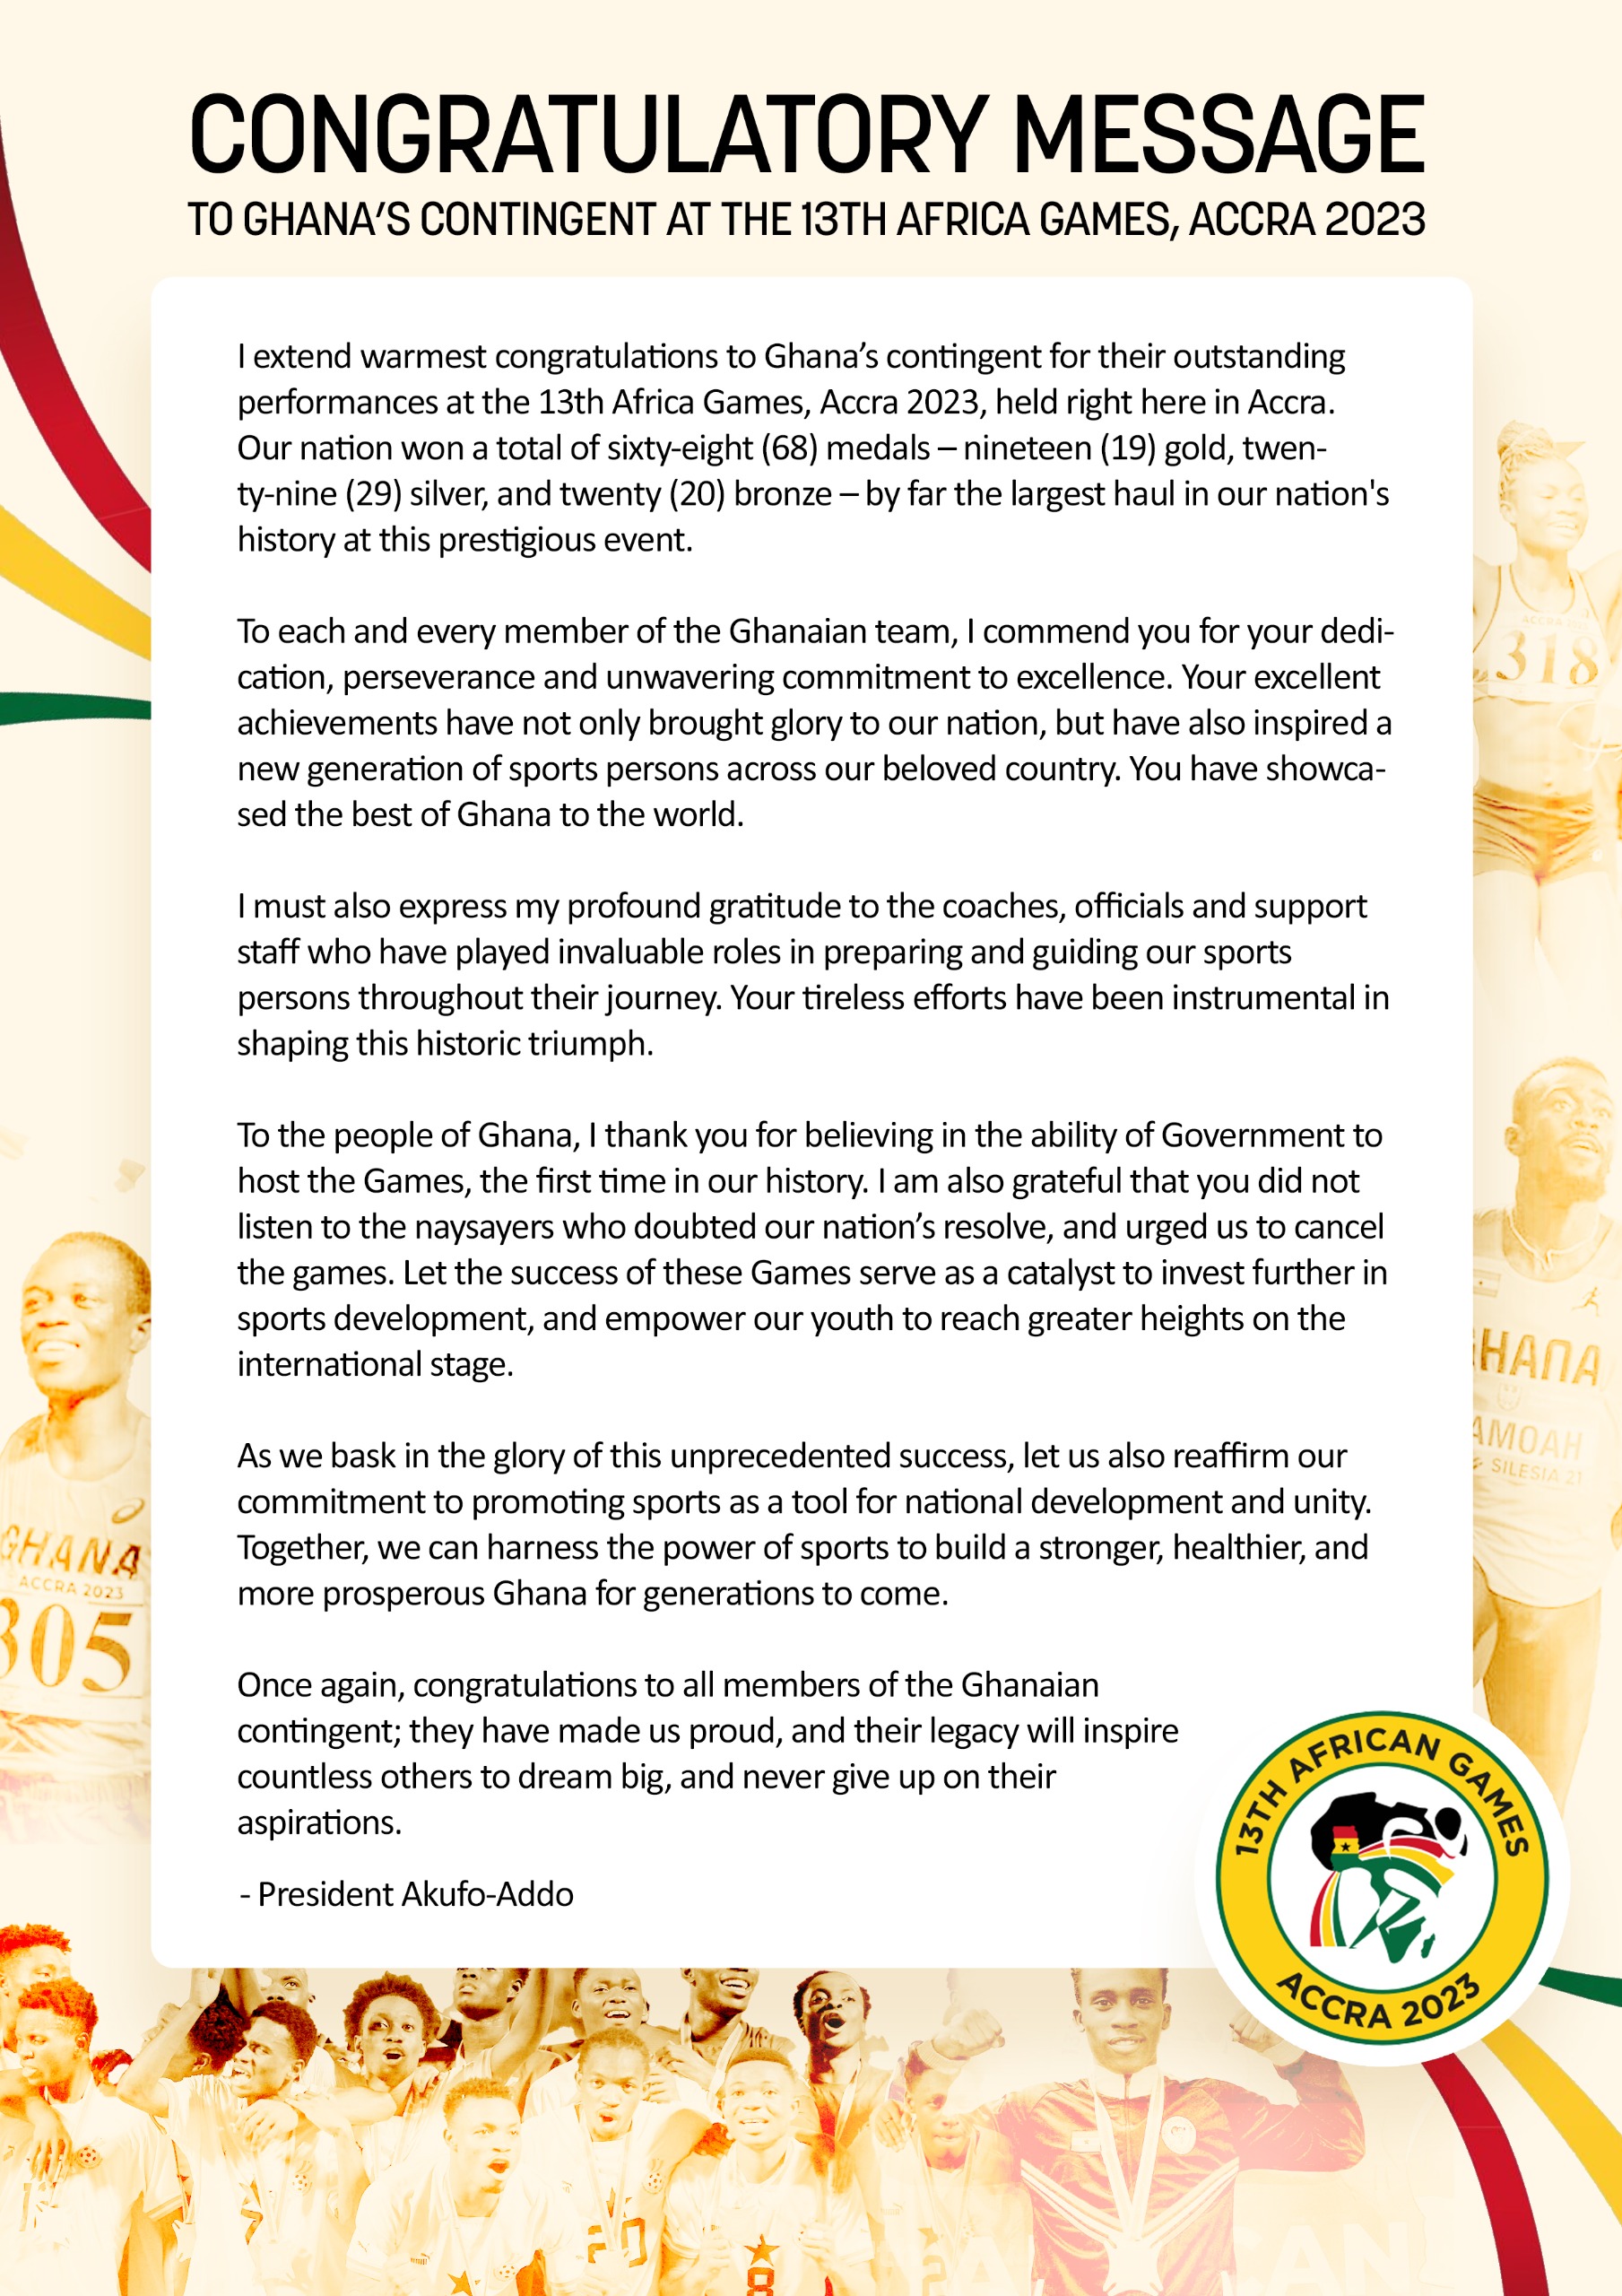 Akufo-Addo thanks Ghanaians for believing in the ability of government to host the 13th African Games